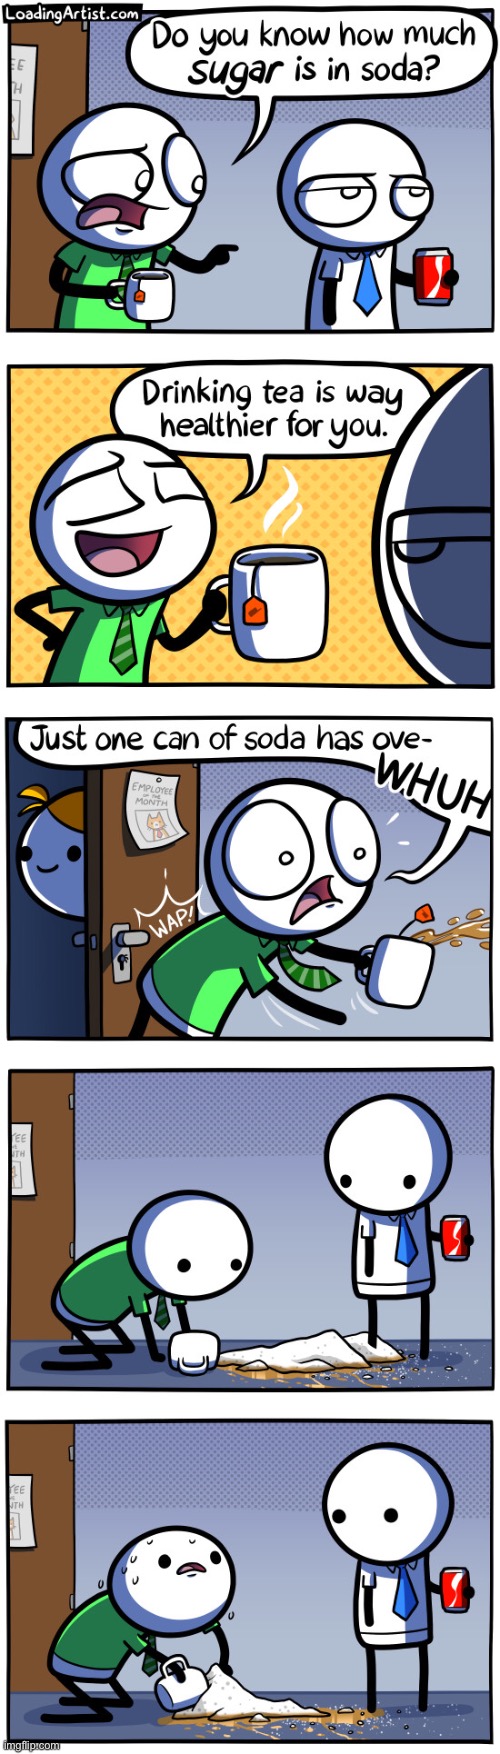 Make sure you pick it all up! | image tagged in memes,funny,comics,tea,sugar,lol | made w/ Imgflip meme maker